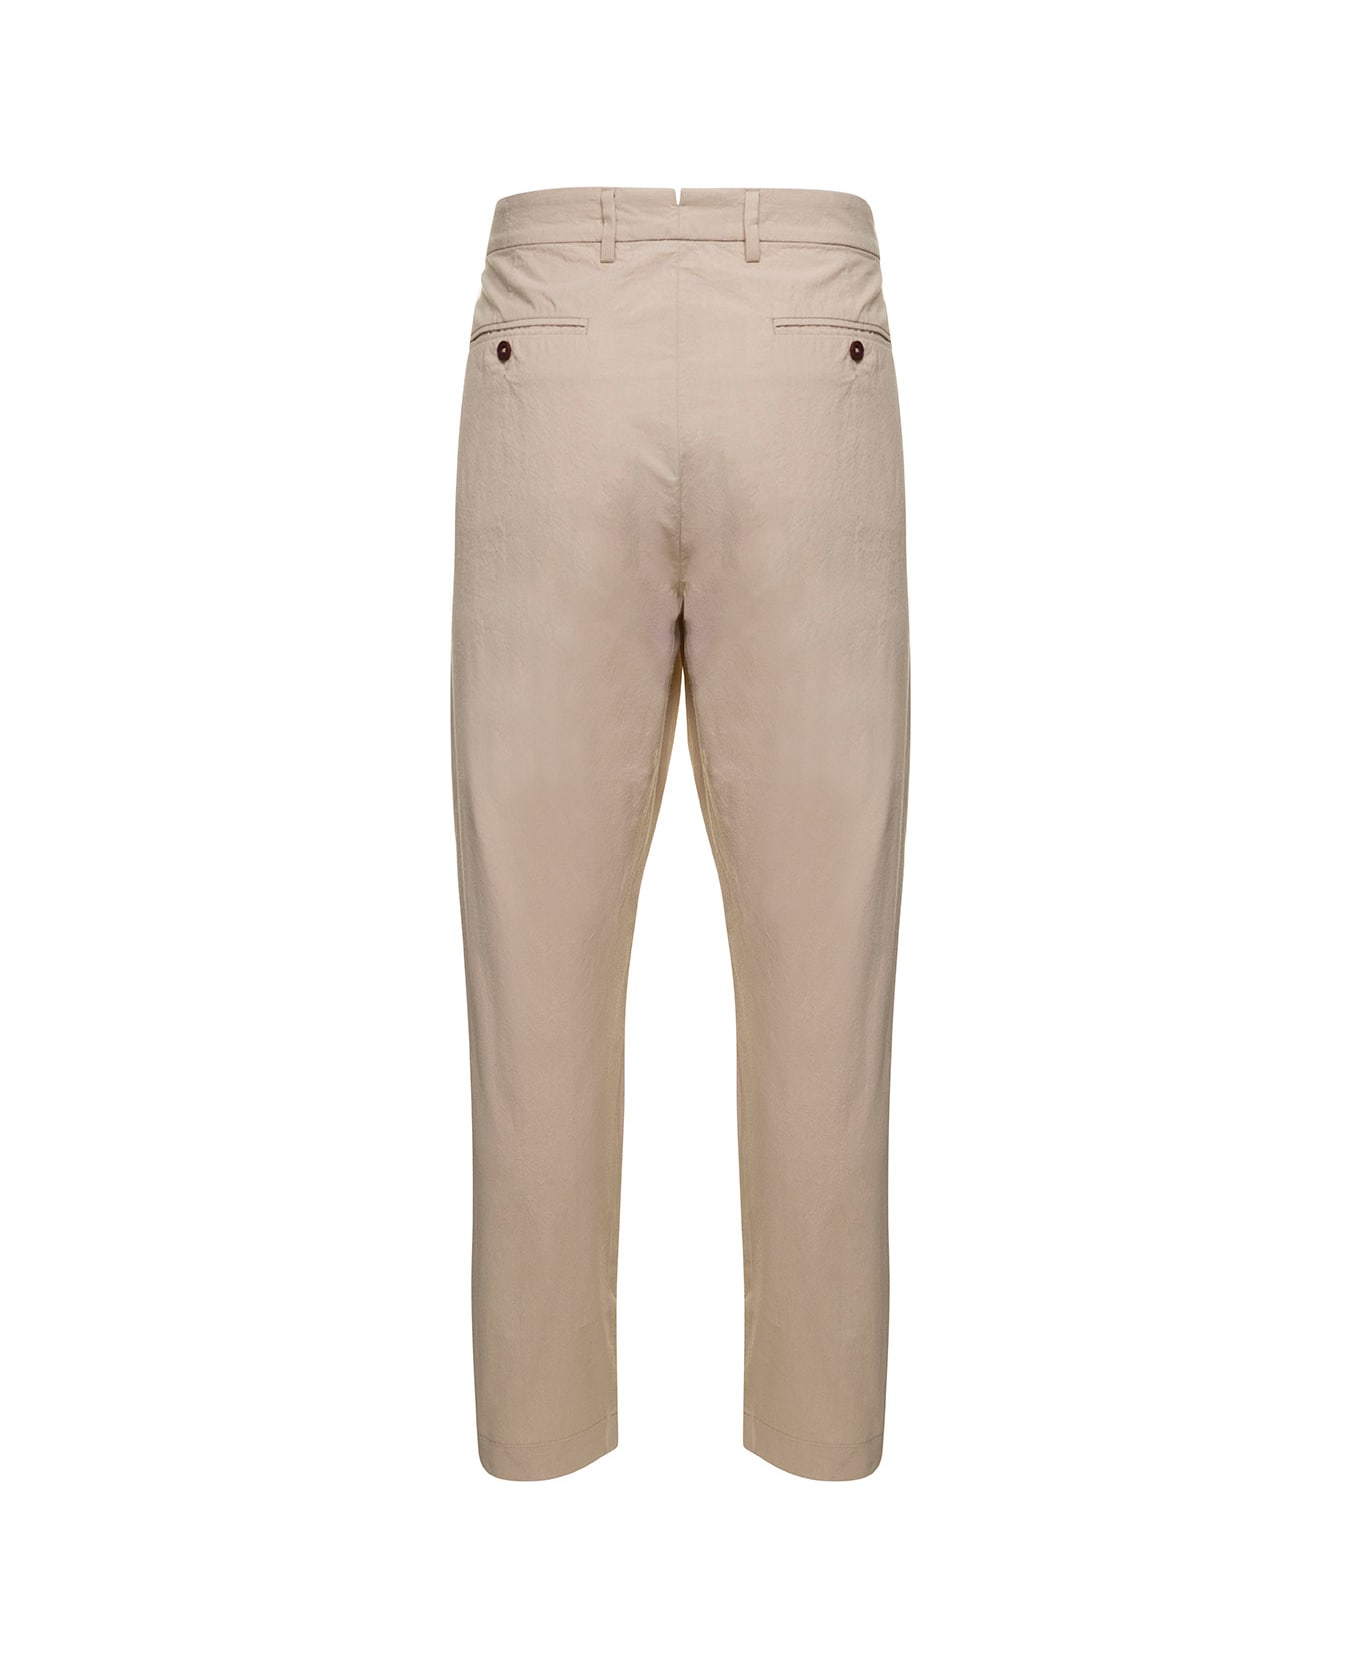 Pence Beige Pants With Button Fastening In Cotton Man - Beige ボトムス